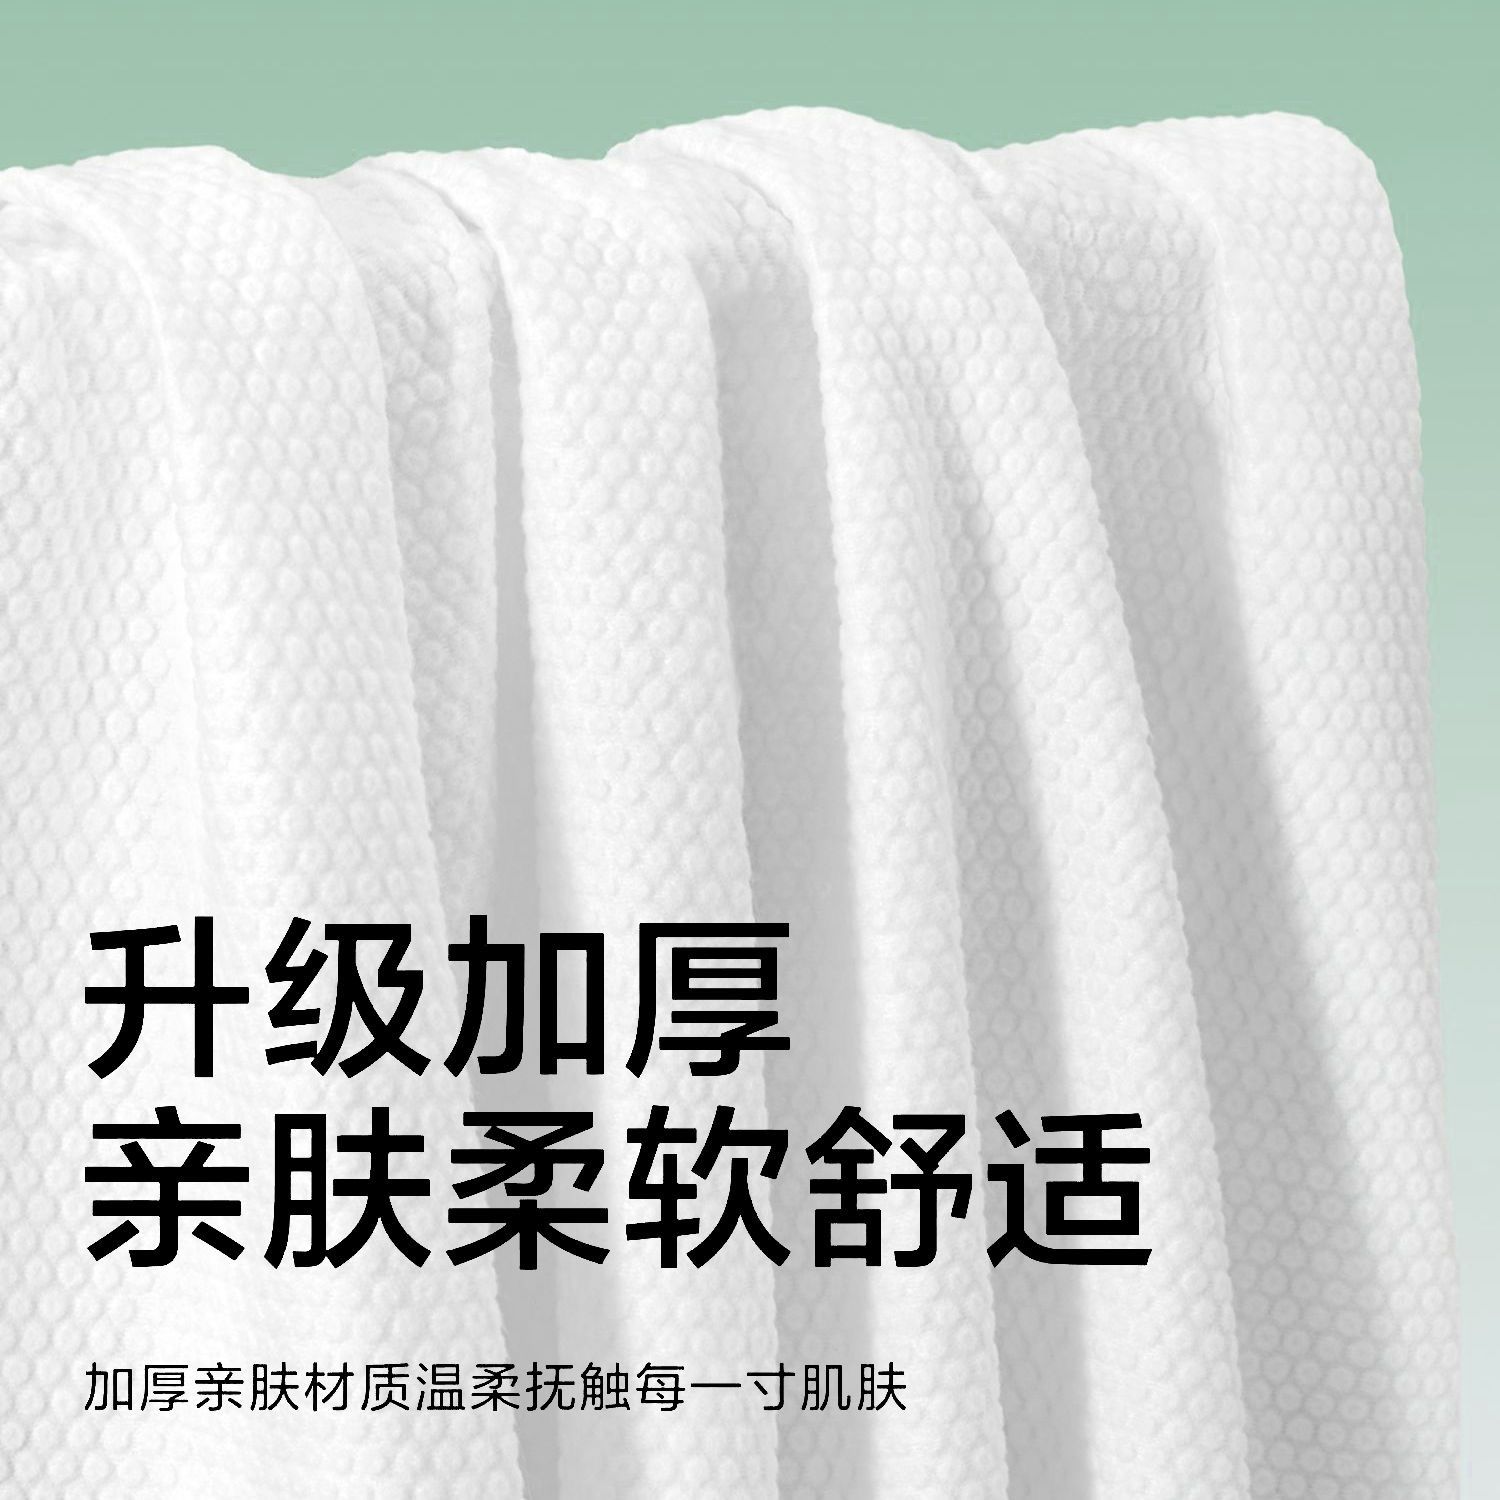 Disposable bath towel for business travel, portable, tourist hotel, special large bath towel for adults and children, special for bathing